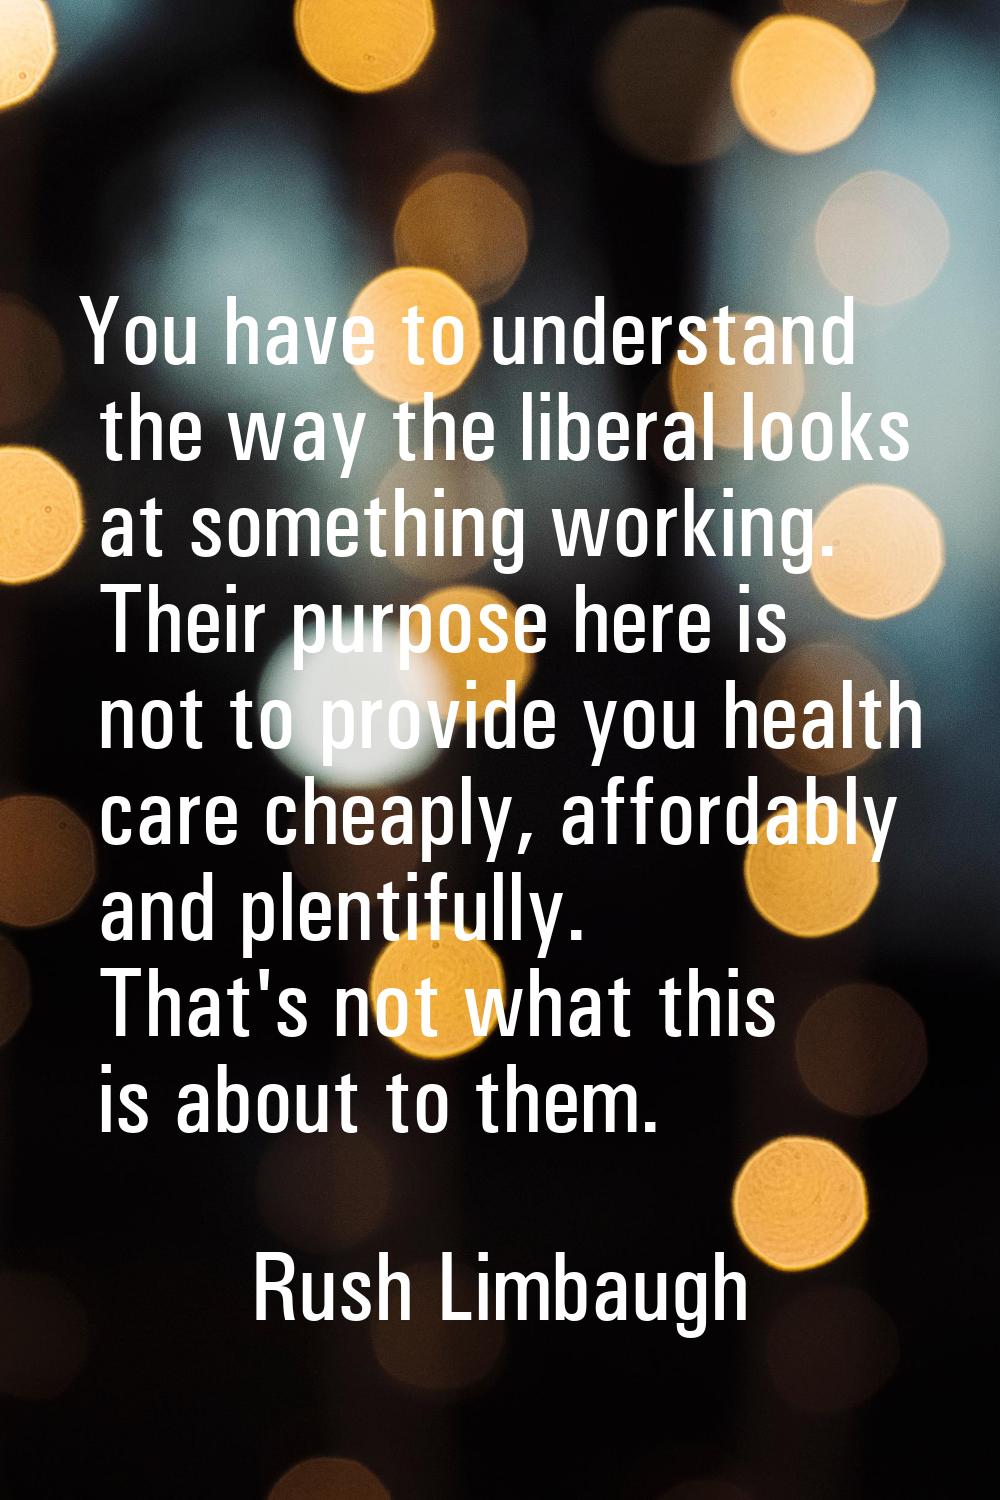 You have to understand the way the liberal looks at something working. Their purpose here is not to